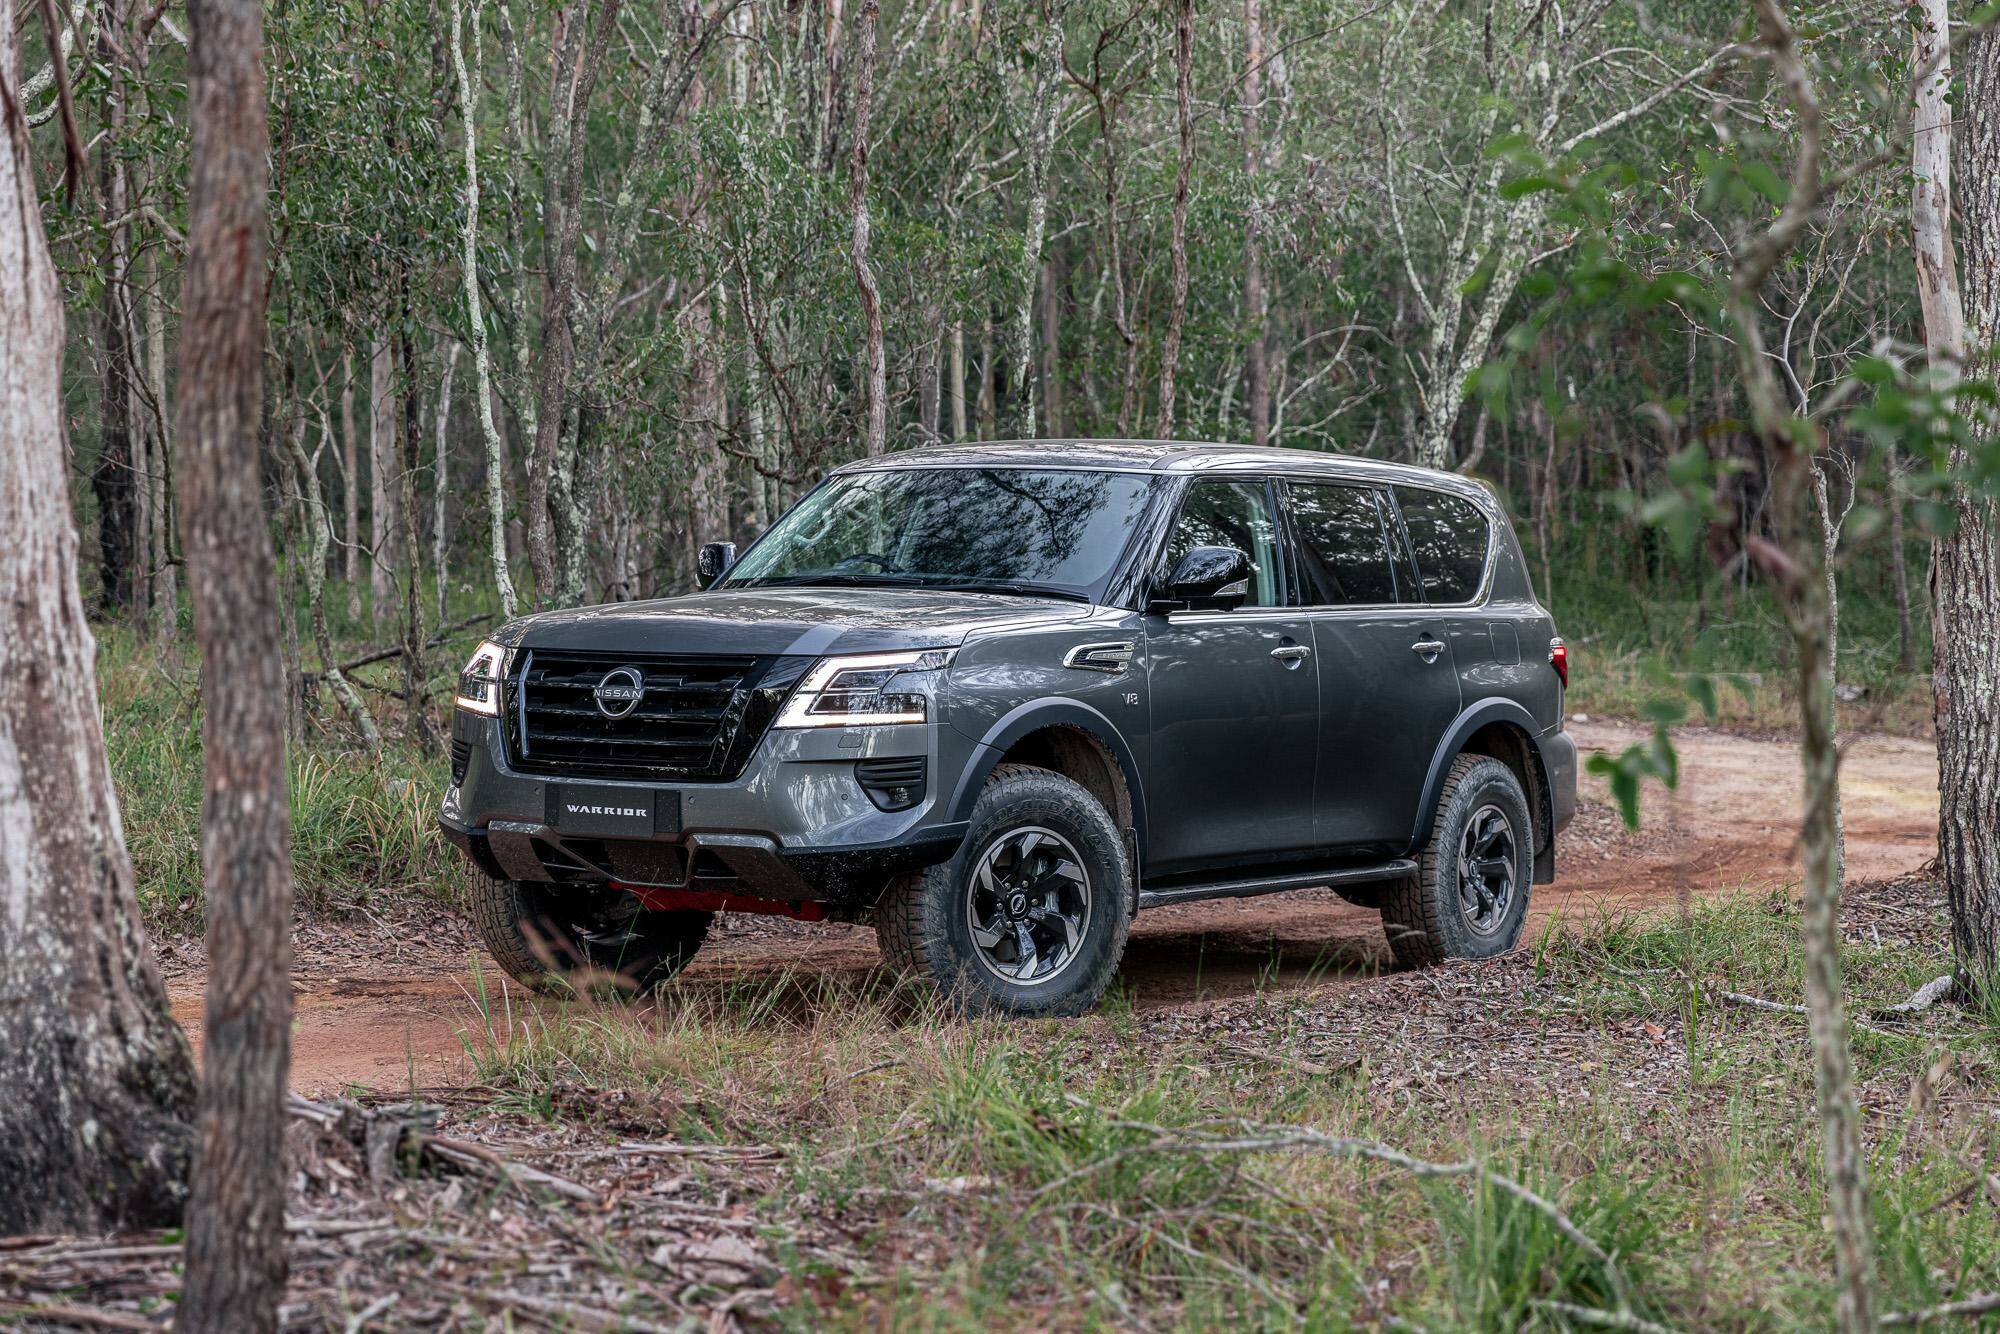 The New 2025 Nissan Patrol Revealed - New Information Details! 